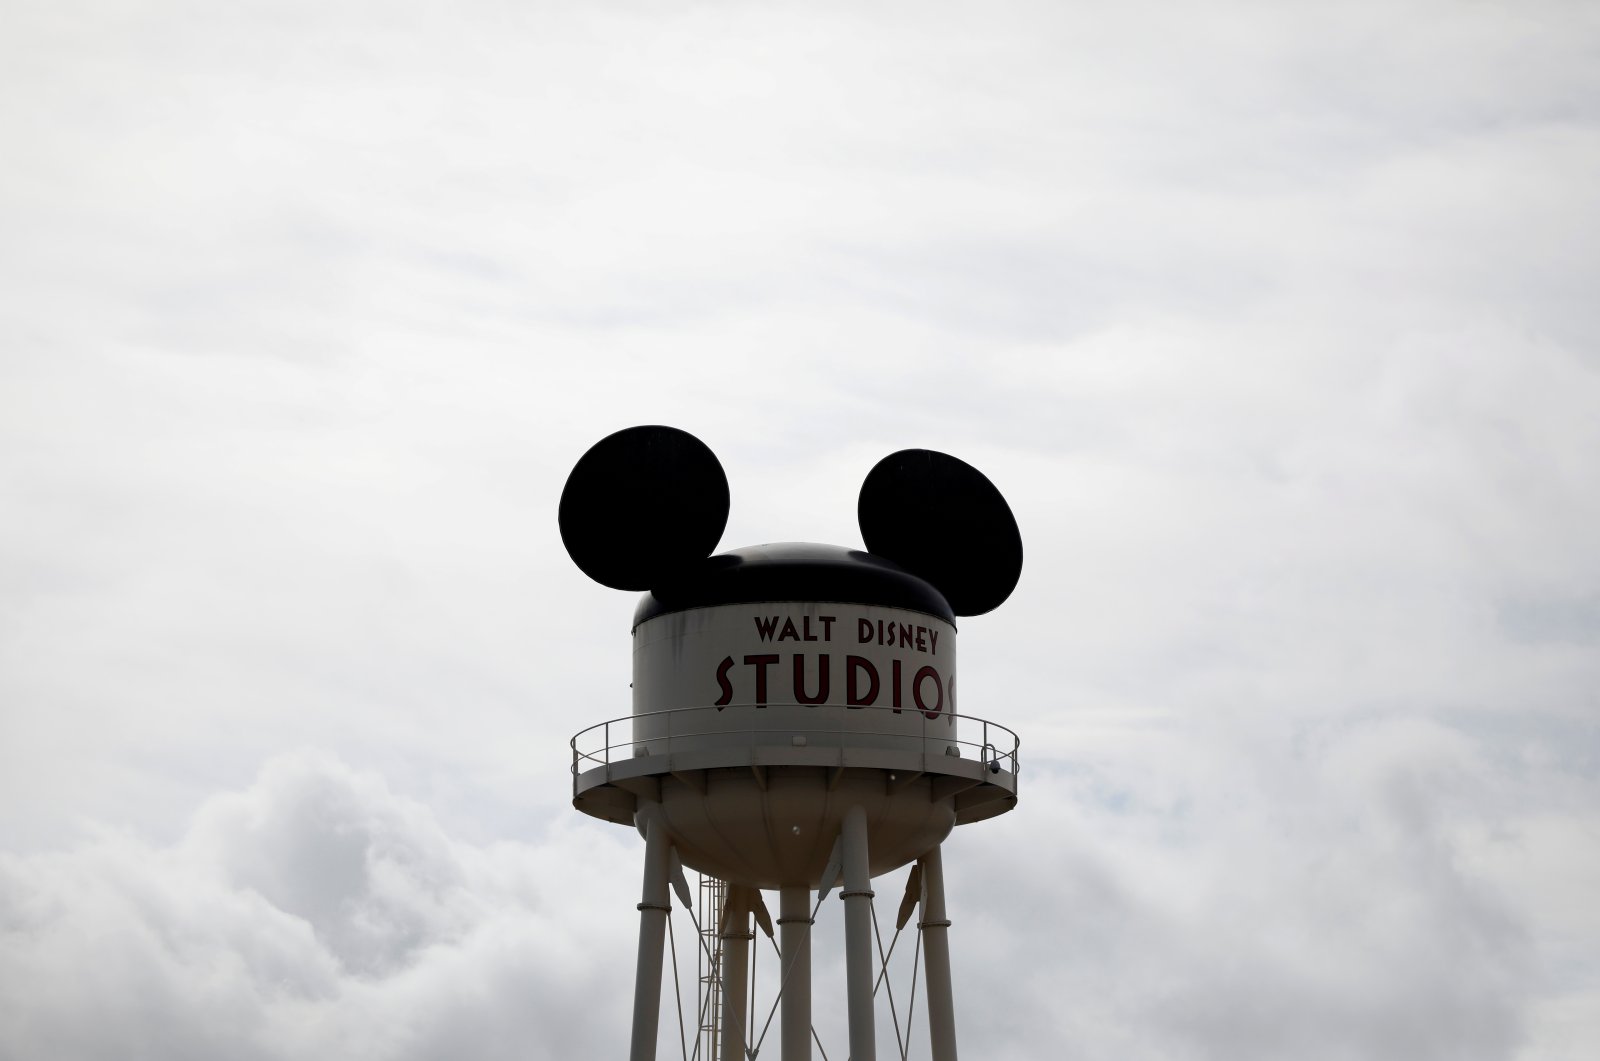 The sign at Walt Disney Studios Park is seen at the entrance of Disneyland Paris, in Marne-la-Vallee, near Paris, France, March 9, 2020.